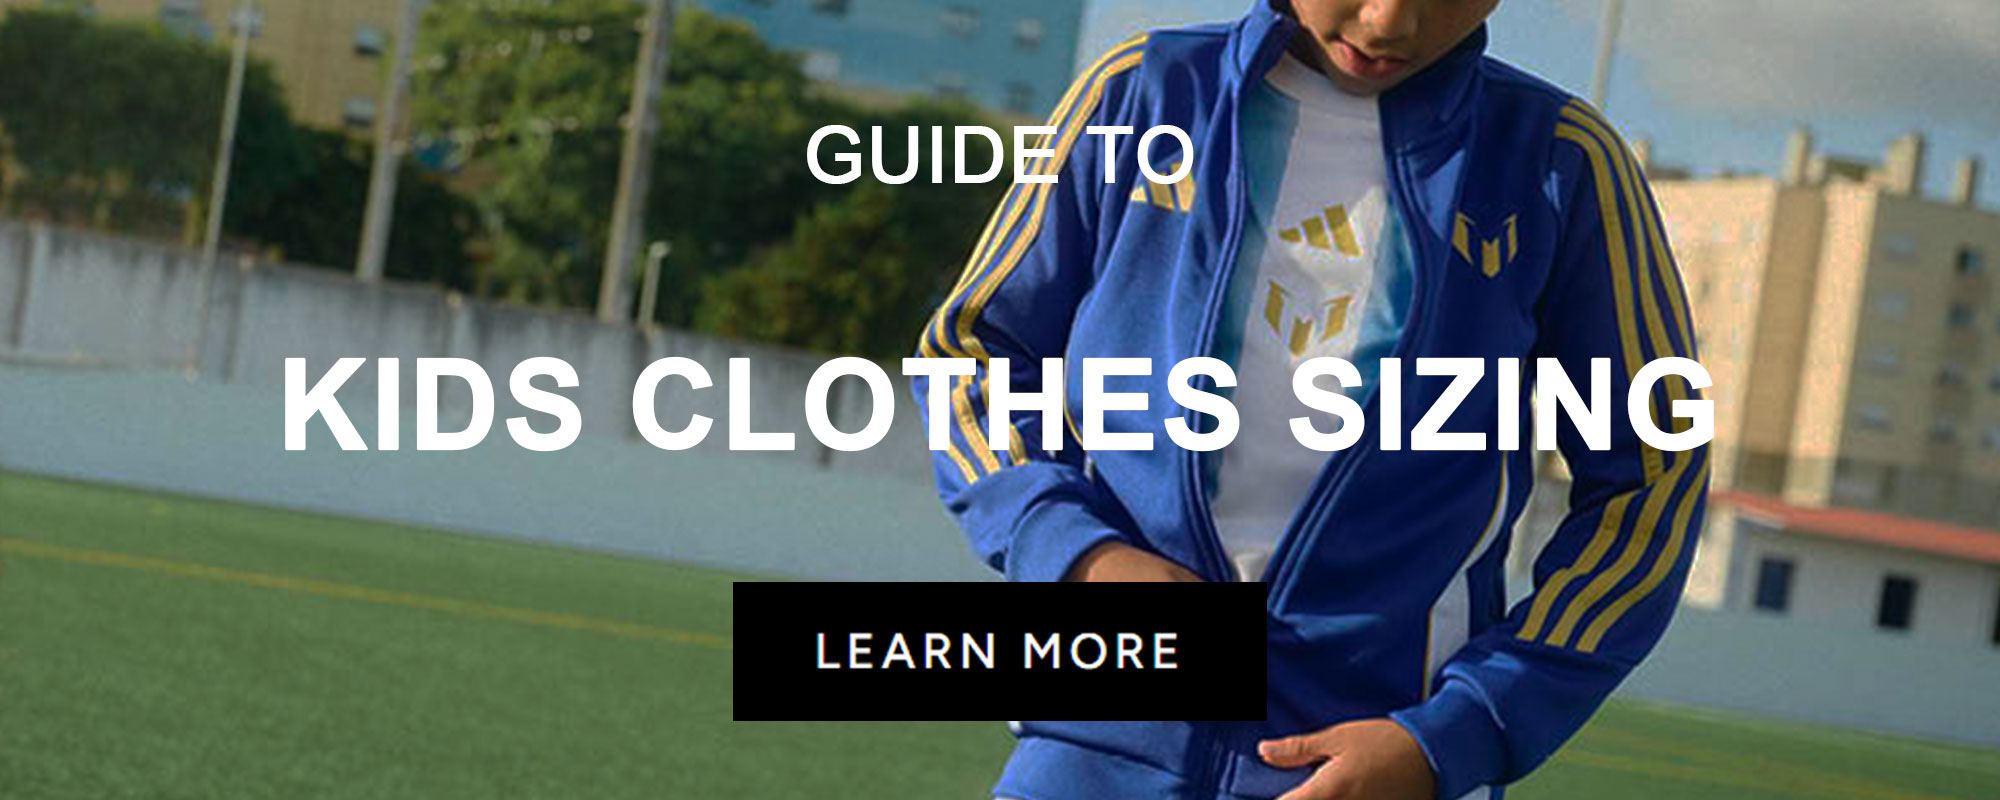 GUIDES_CLOTHES_KidsClothesSizing.jpg